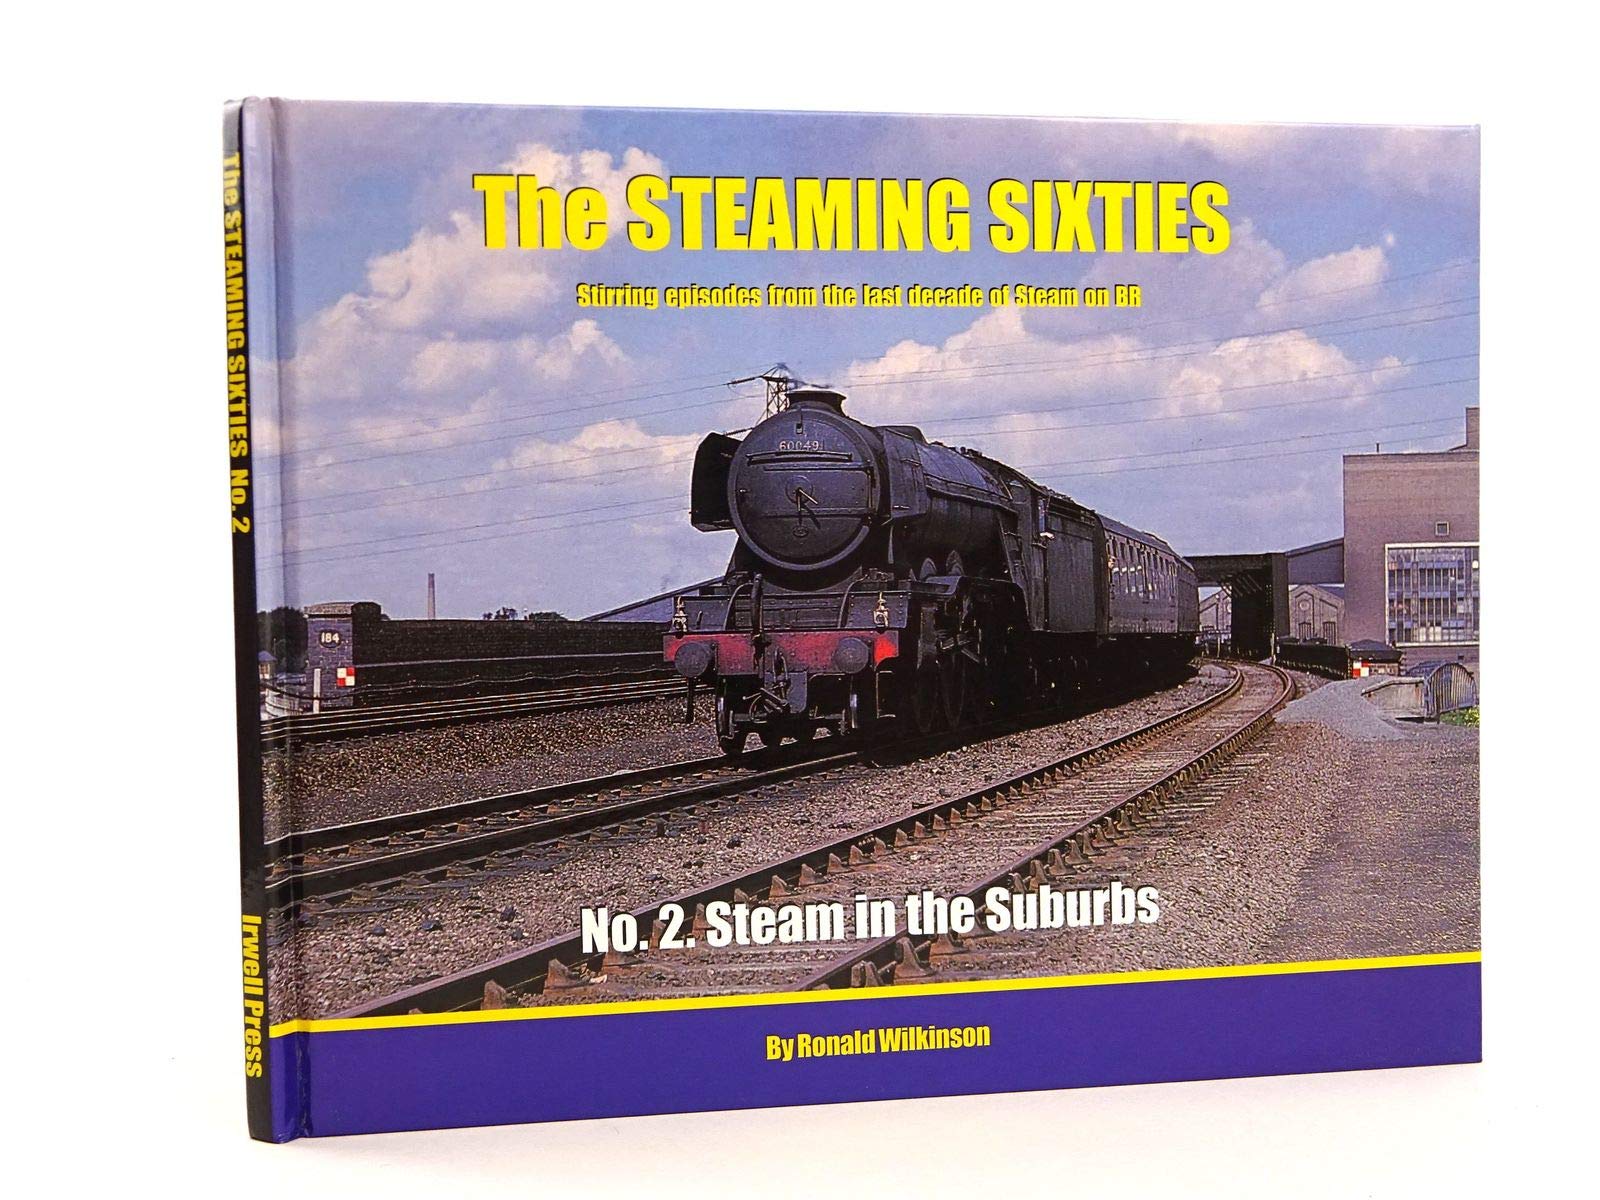 THE STEAMING SIXTIES - 2 - Steam in the Suburbs - Changeover on the GN LAST FEW COPIES